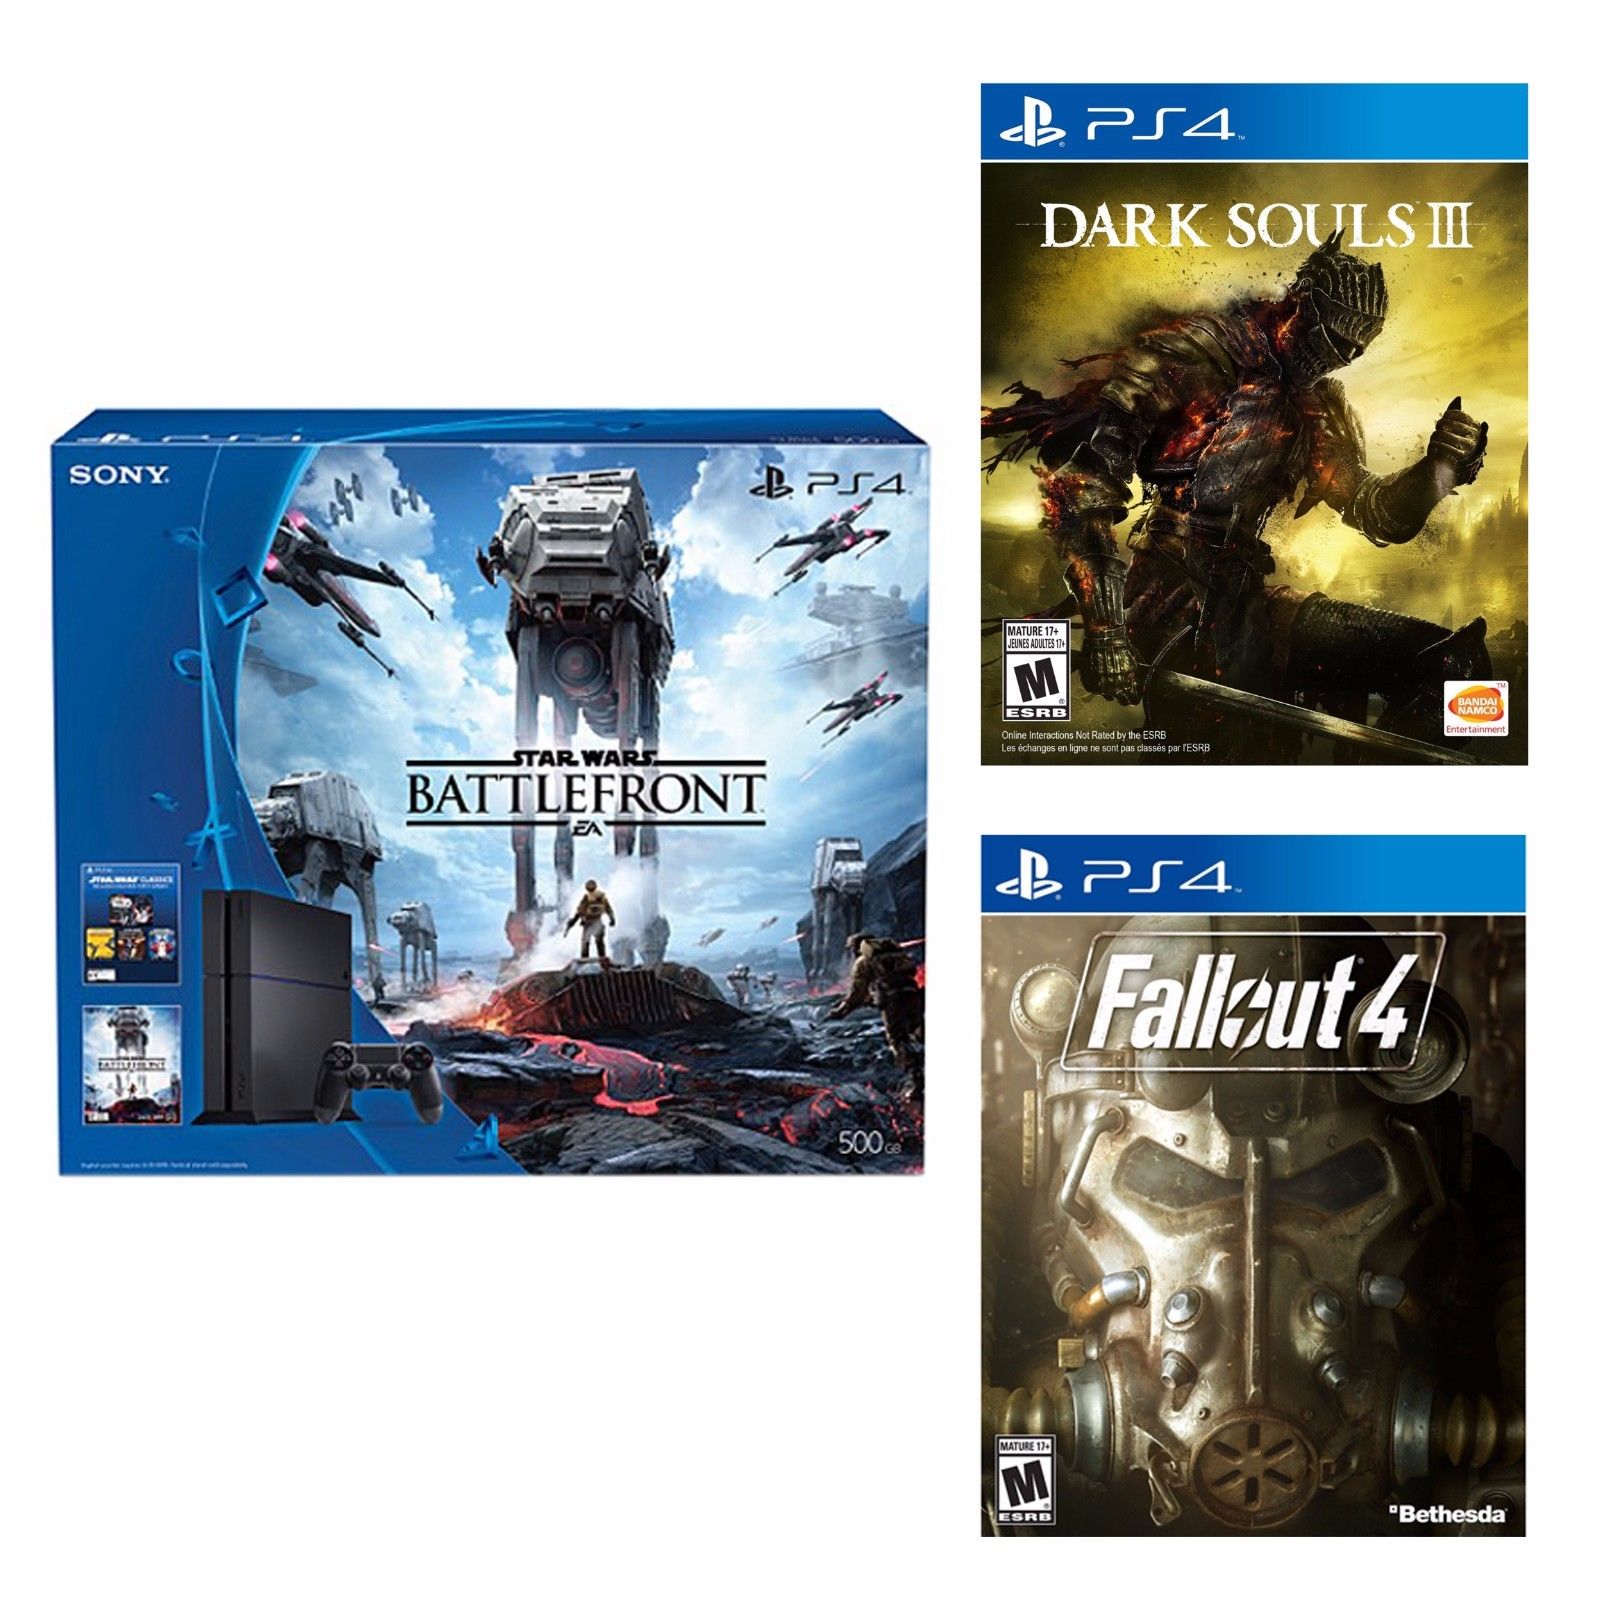 Image for PlayStation 4 bundle includes Dark Souls 3, Fallout 4, and Battlefront for $390